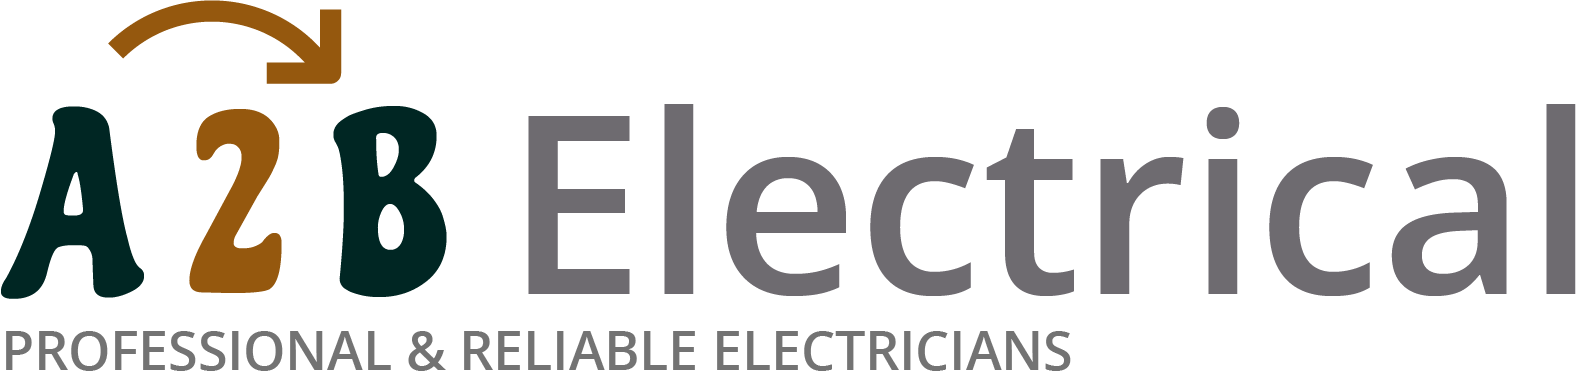 If you have electrical wiring problems in Dagenham, we can provide an electrician to have a look for you. 